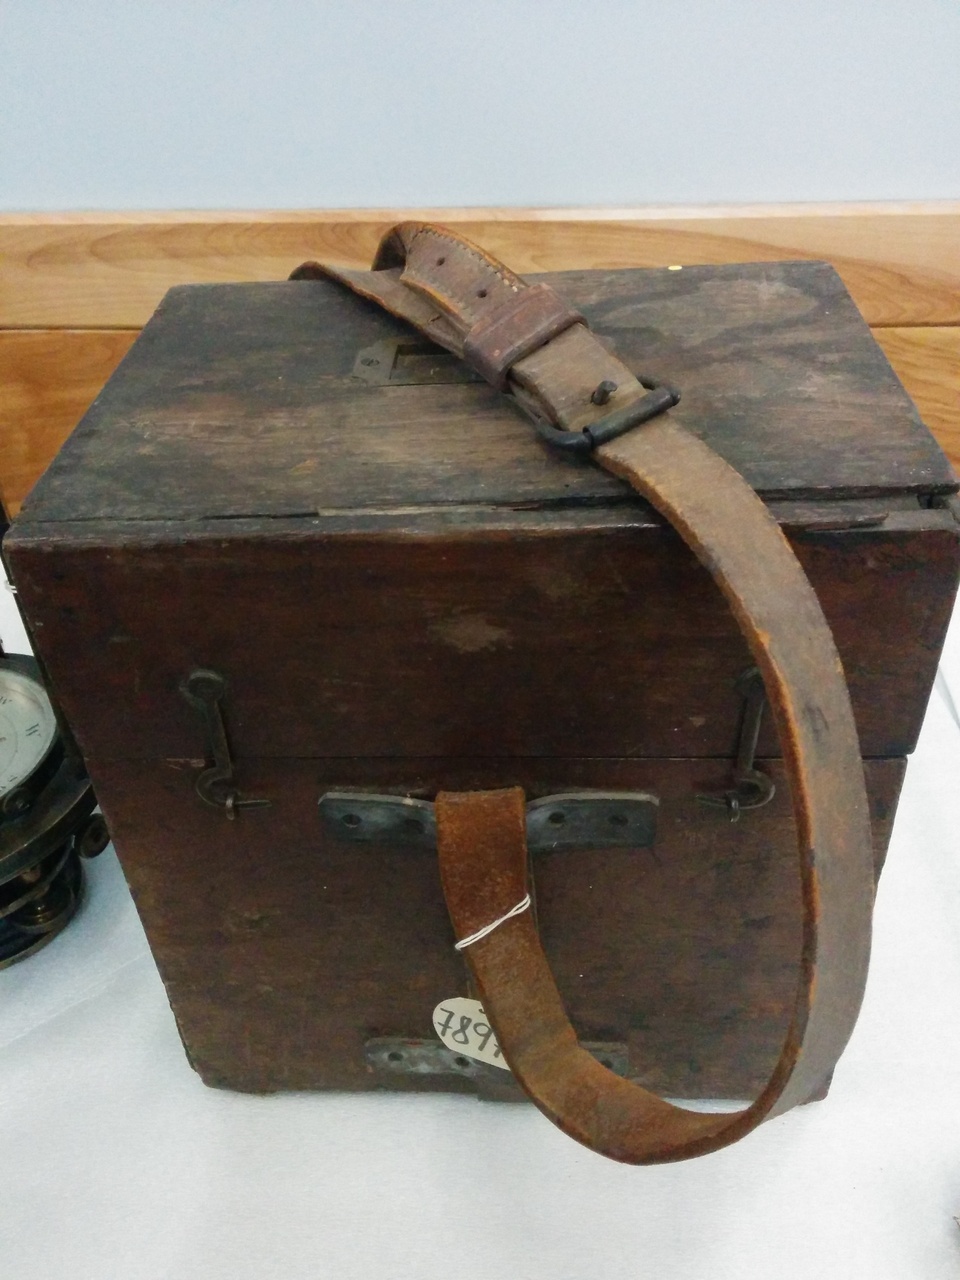 Transit carrying case and strap, exterior